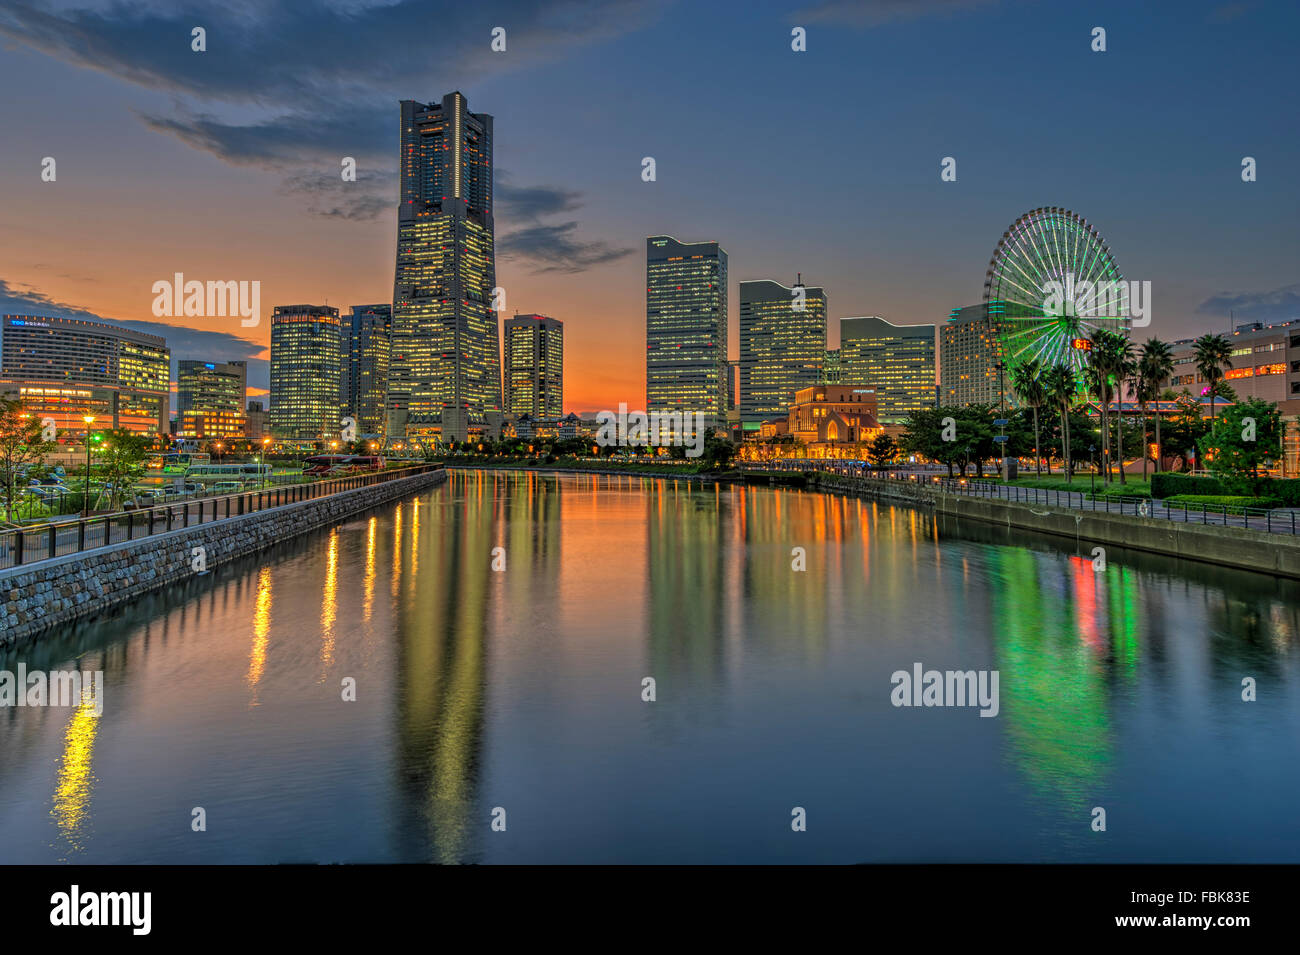 The reflection of Yokohama Landmark Tower and the surrounding modern office buildings on water during twilight Stock Photo